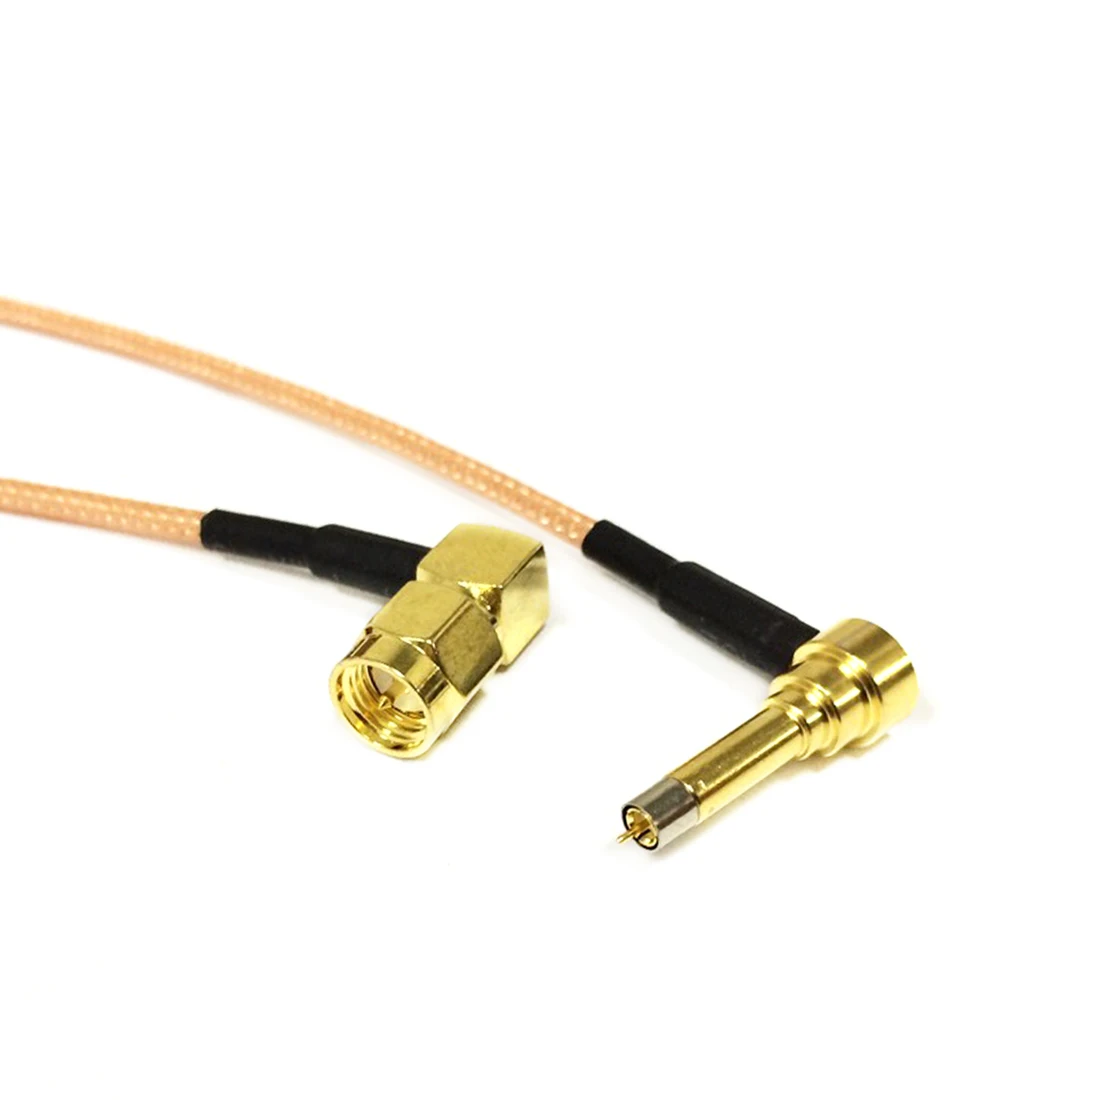 3G 4G Antenna External Cable SMA Male Plug Right Angle to MS156 Right Angle RG316 Coaxial Cable15cm 6inch Pigtail low insertion loss 5 2400mhz zinc 8 way satellite signal splitter tv signal satellite tv antenna rf coaxial cable splitter